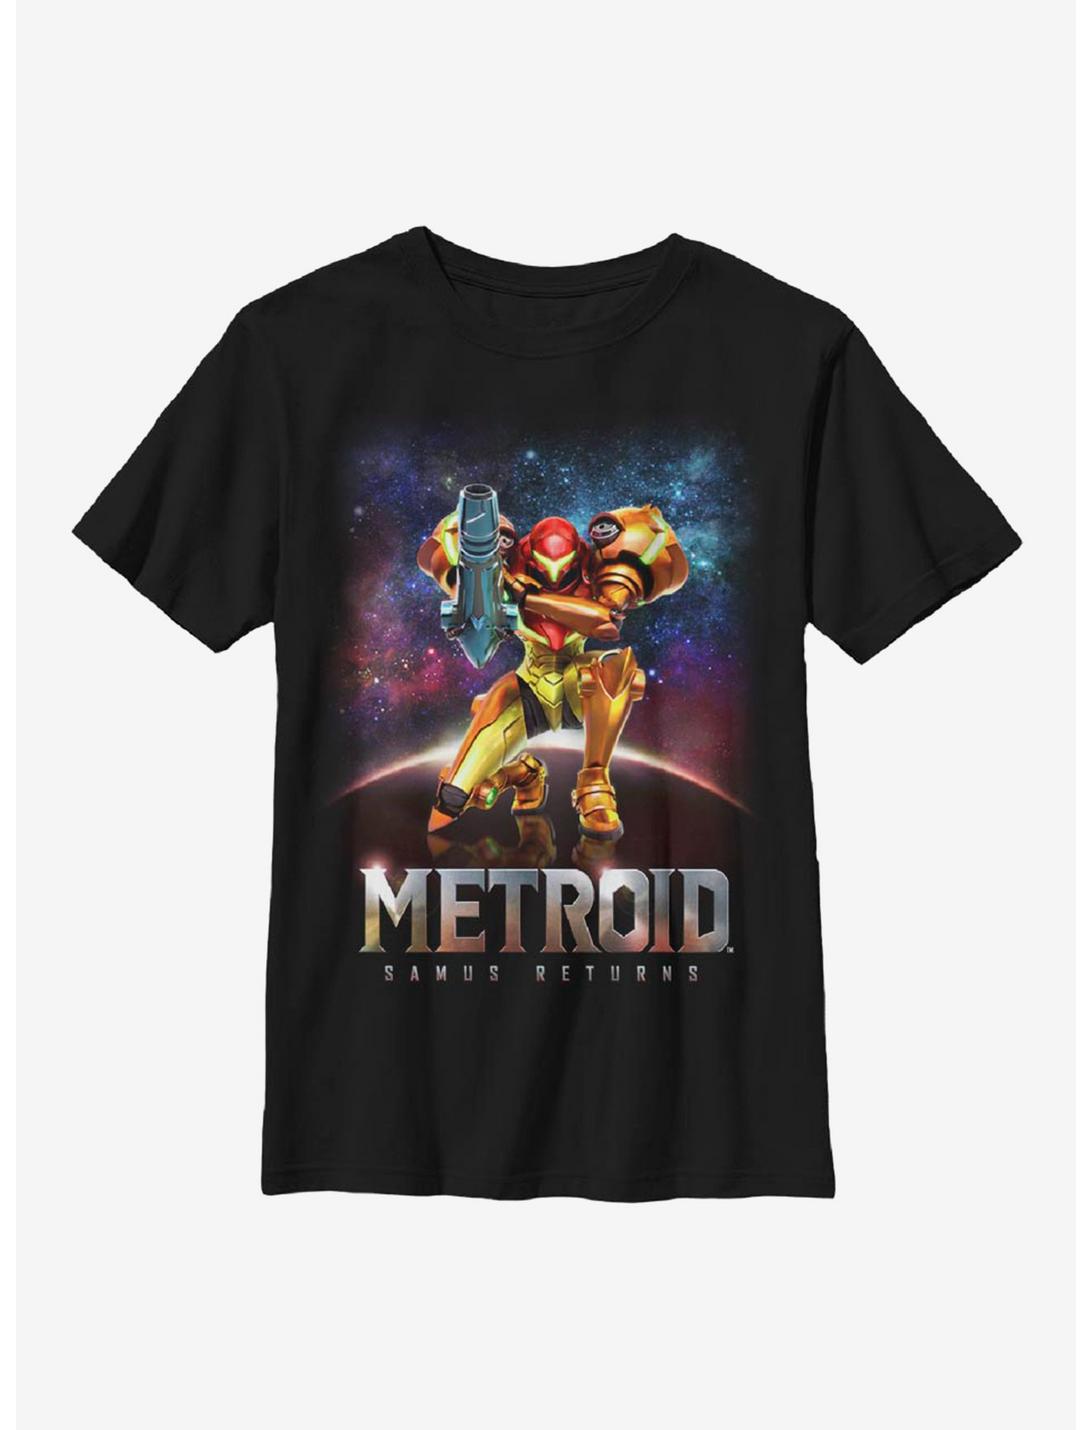 Nintendo Traditional Metroid Cover Youth T-Shirt, BLACK, hi-res